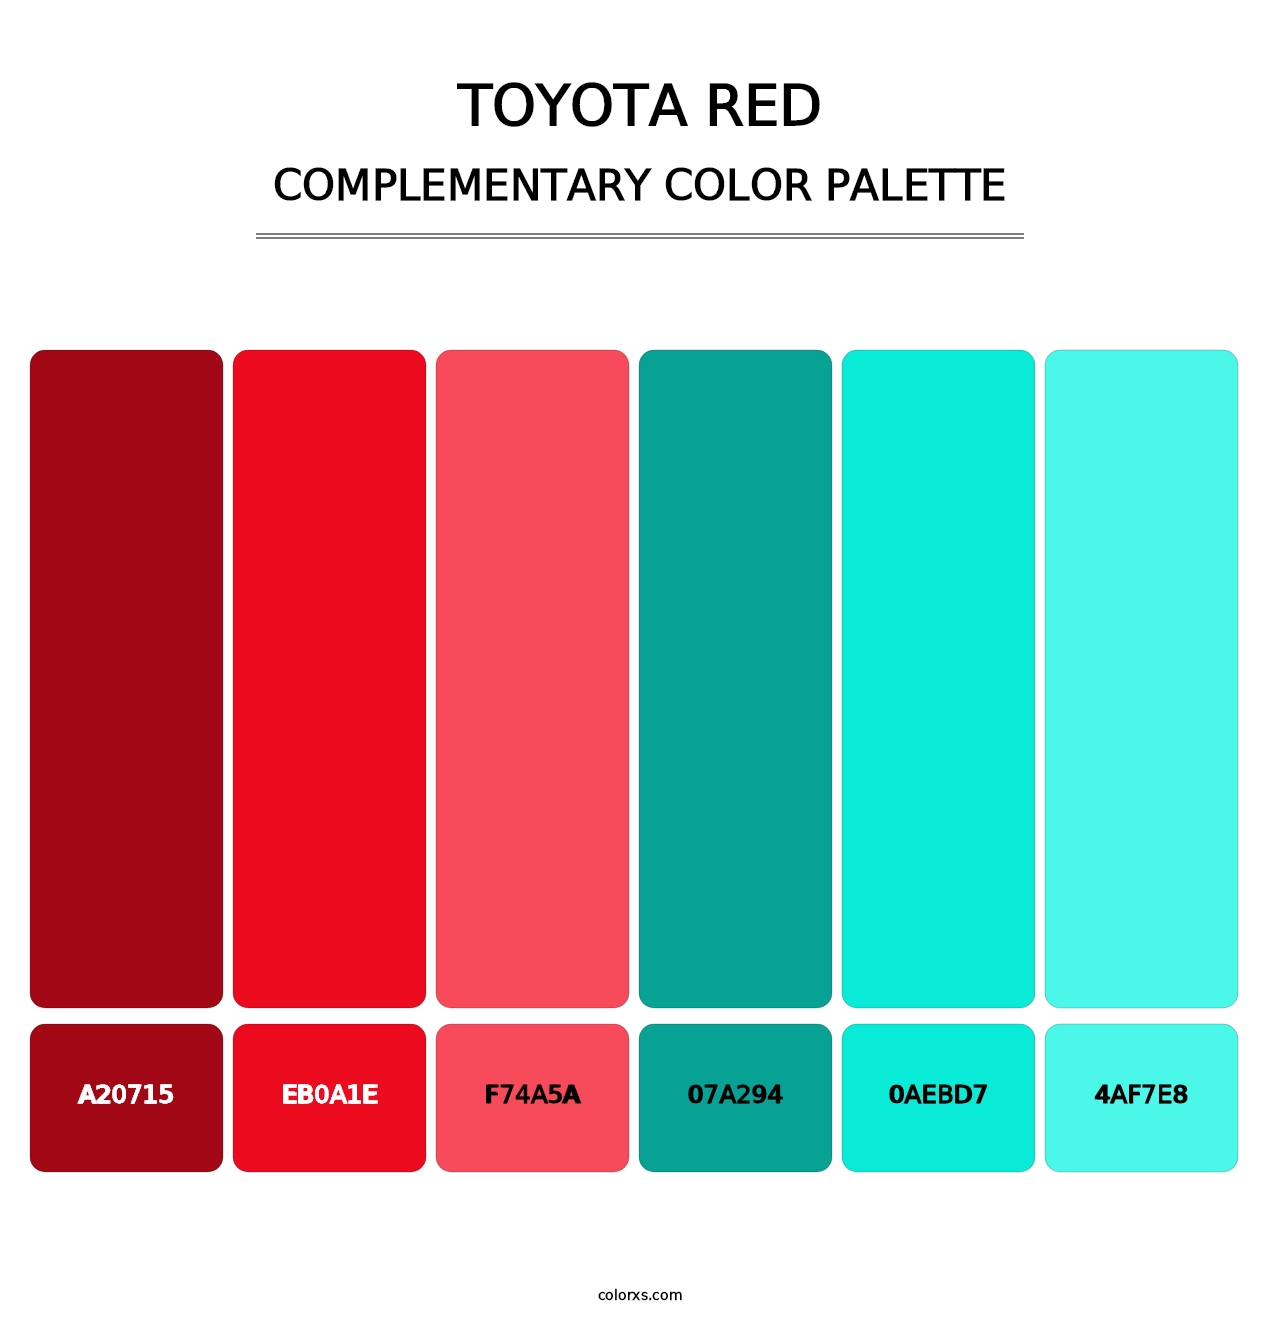 Toyota Red - Complementary Color Palette